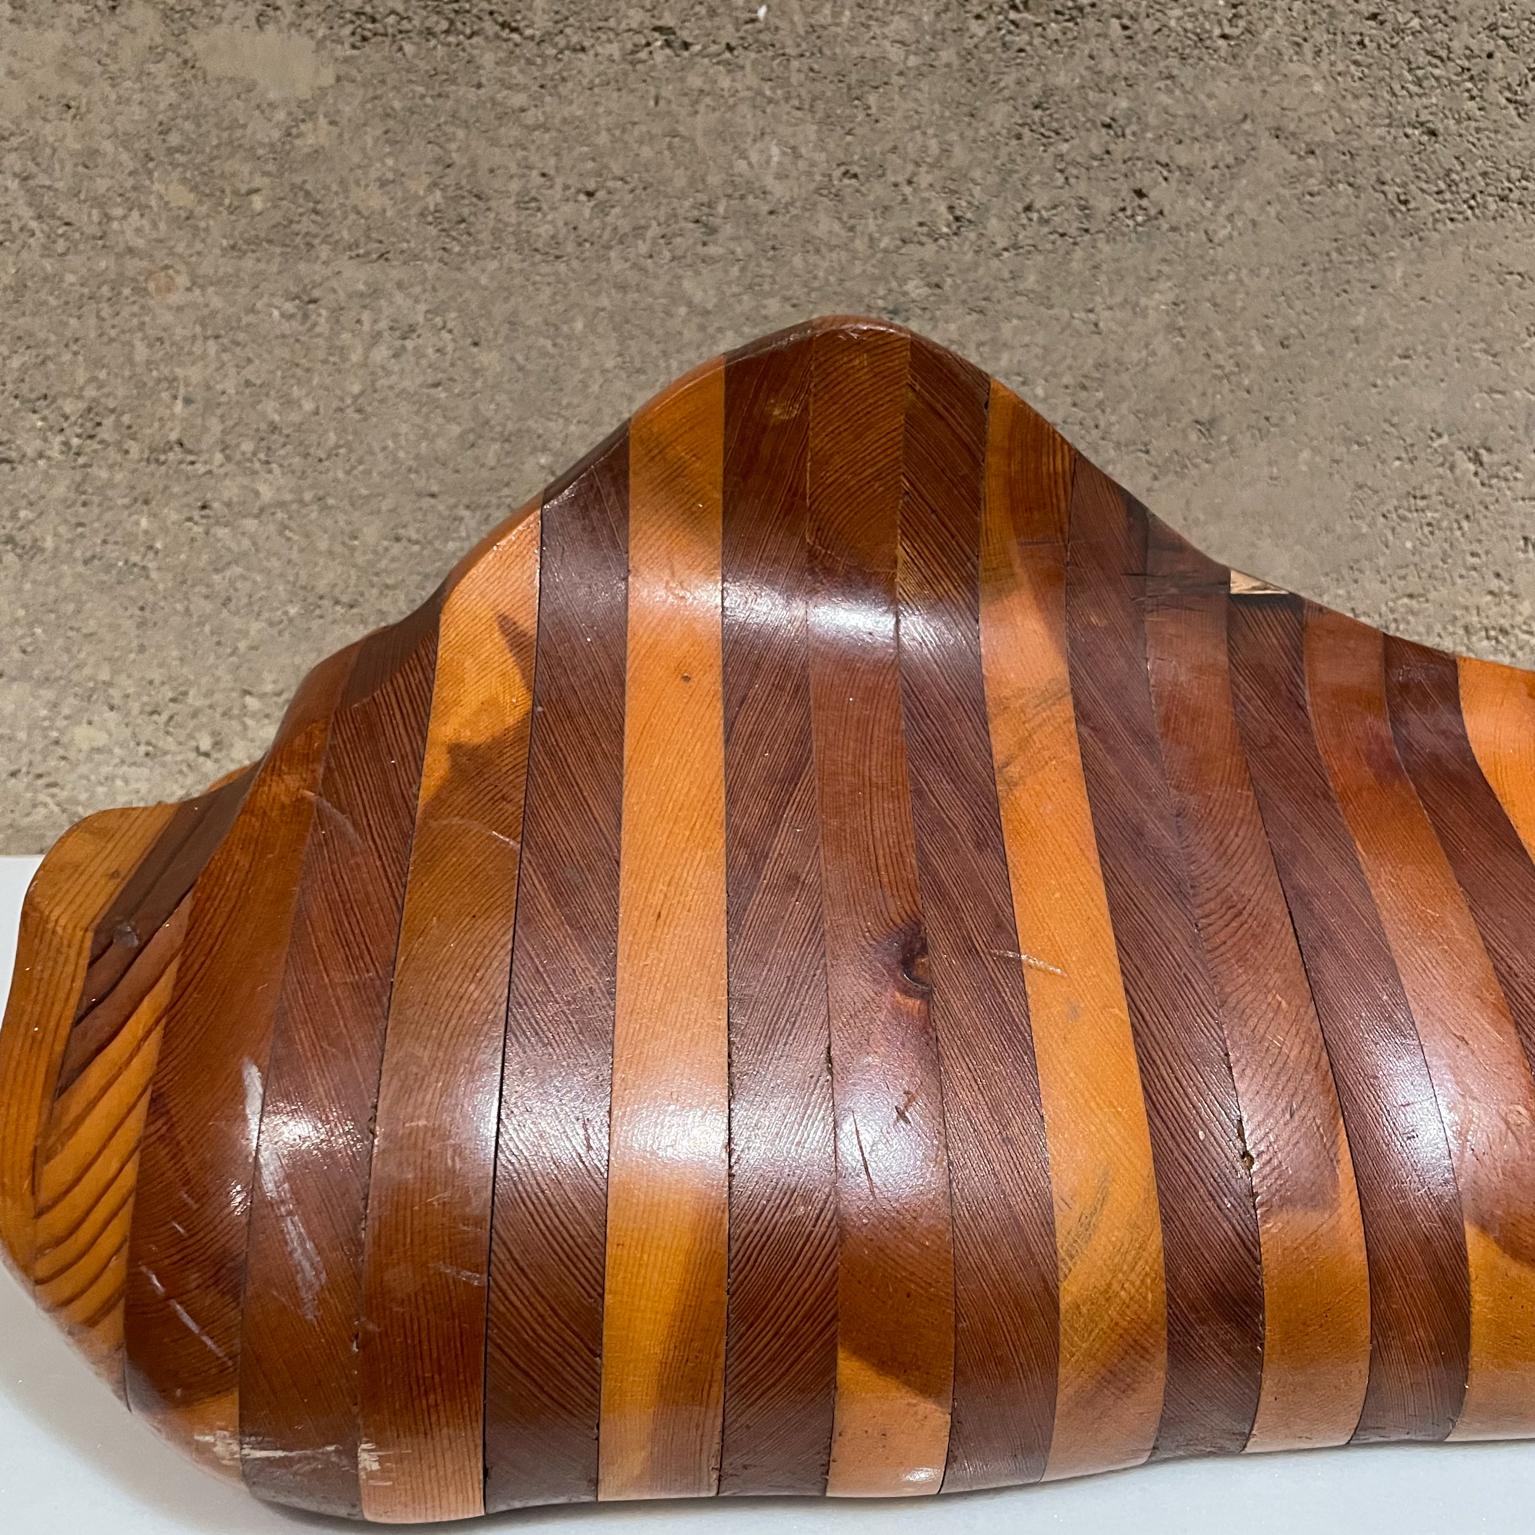 1970s Abstract Organic Modern Table Sculpture Free Form in Striped Exotic Wood  In Good Condition For Sale In Chula Vista, CA